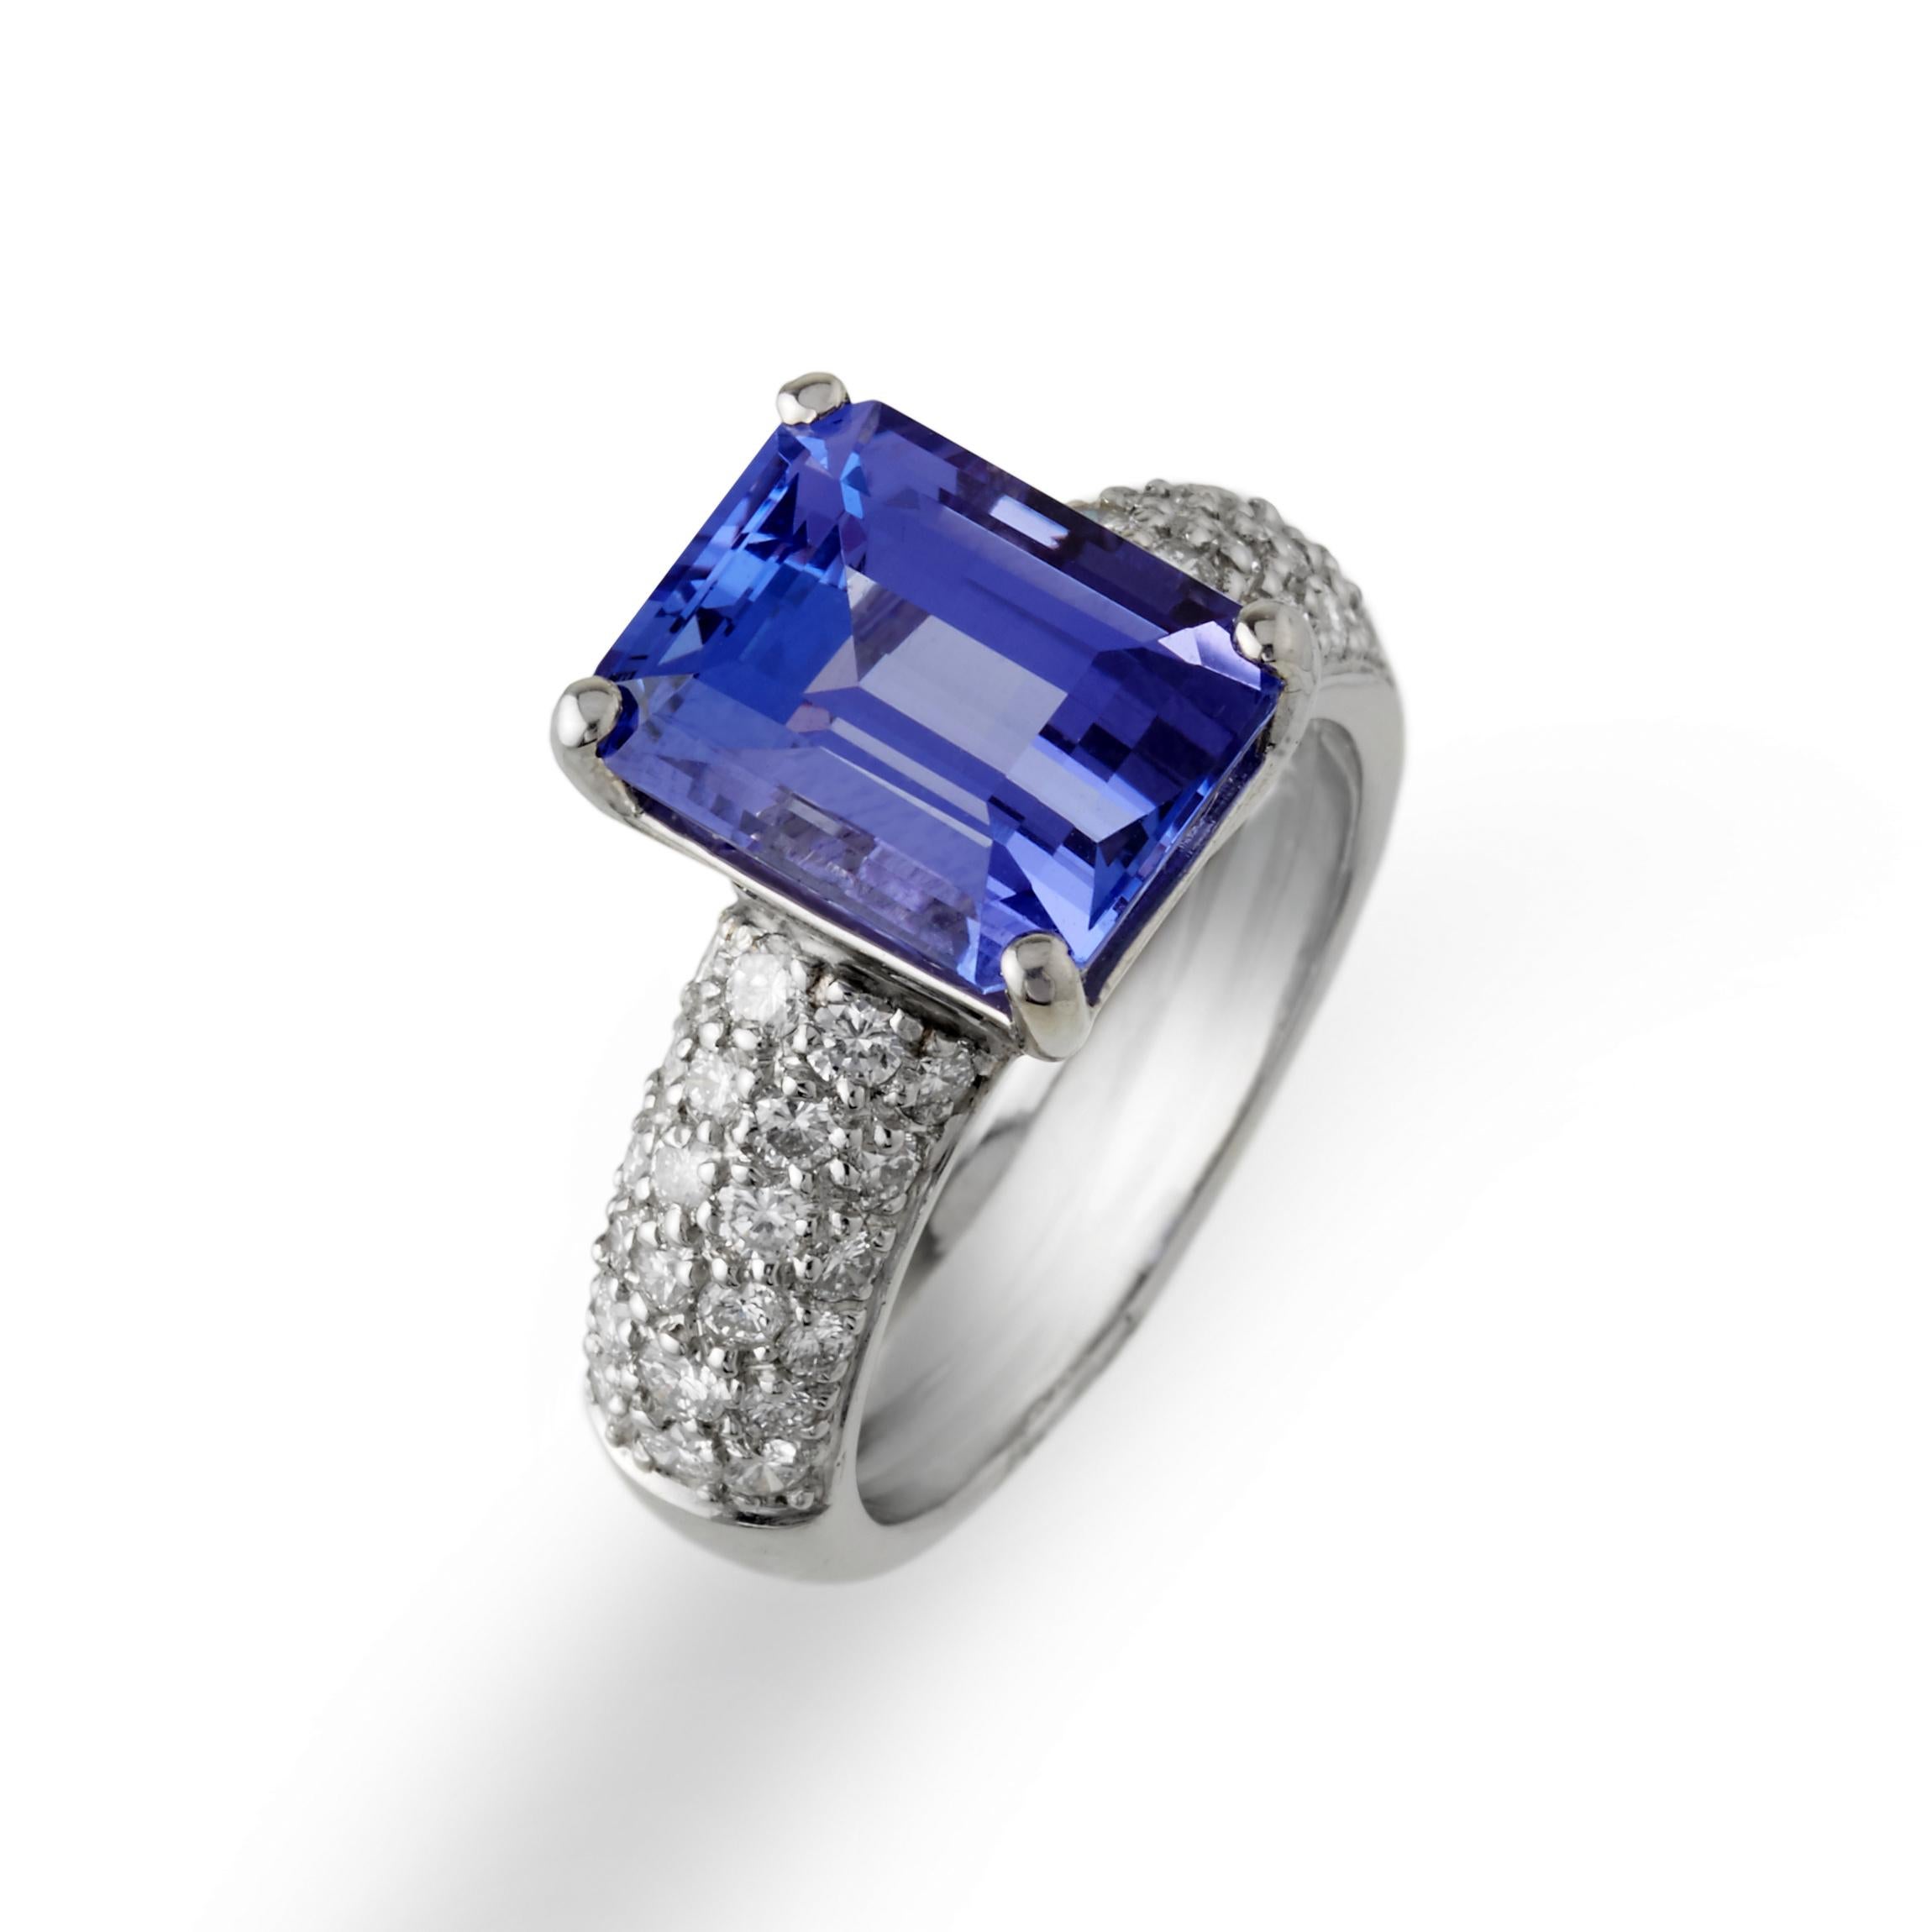 This sublime tanzanite, 5.80ct, is set over a fine pave white diamond platinum ring. The ring's simplicity makes it so one may wear it daily, yet the pop of blue makes a subtle statement. With that being said, this simple, yet not so simple, ring is